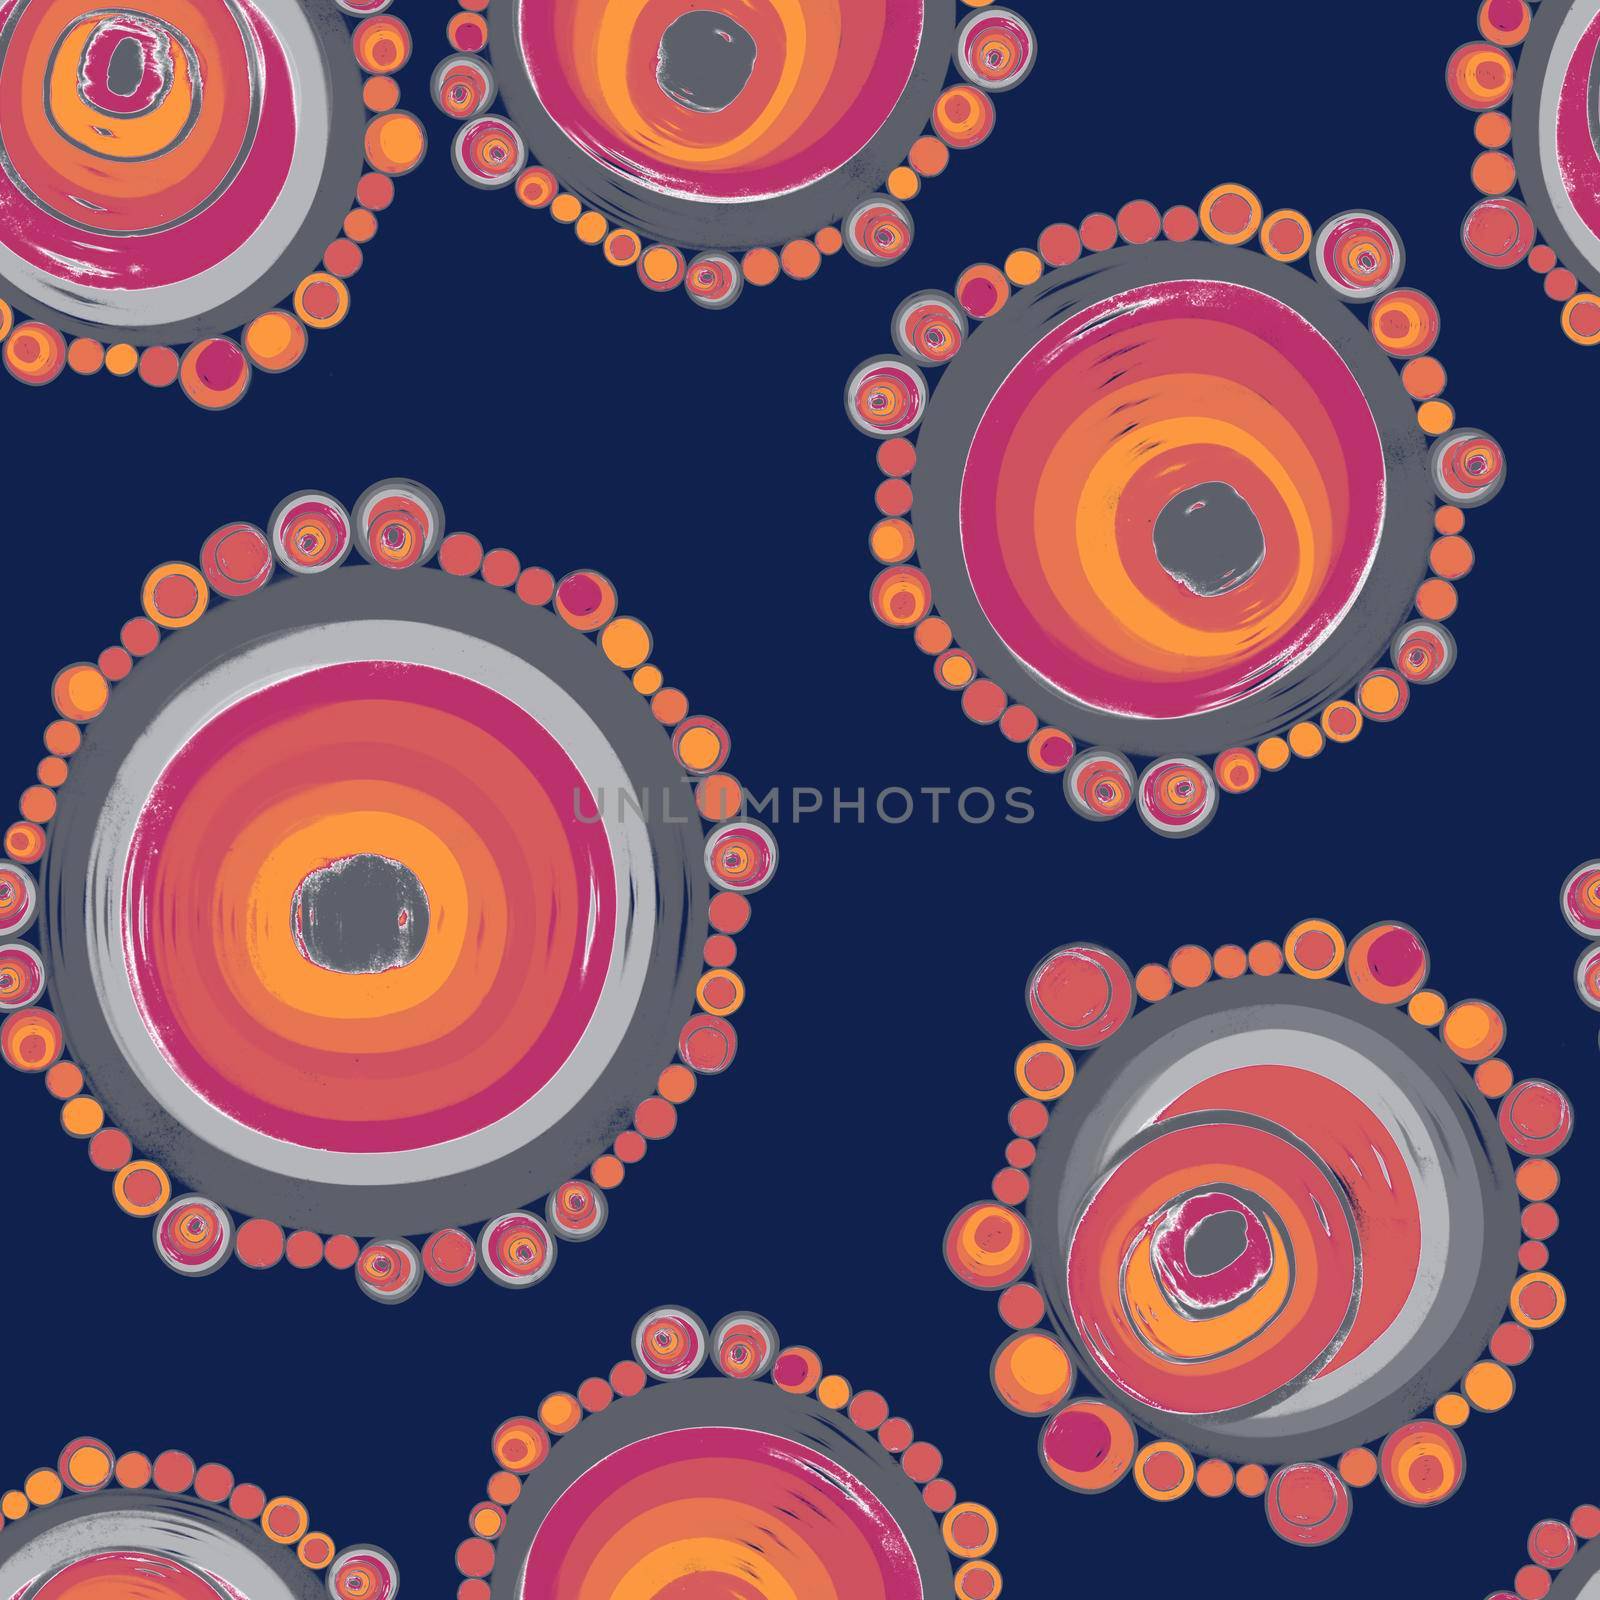 Repeating pattern with circles filled with dots by Angelsmoon